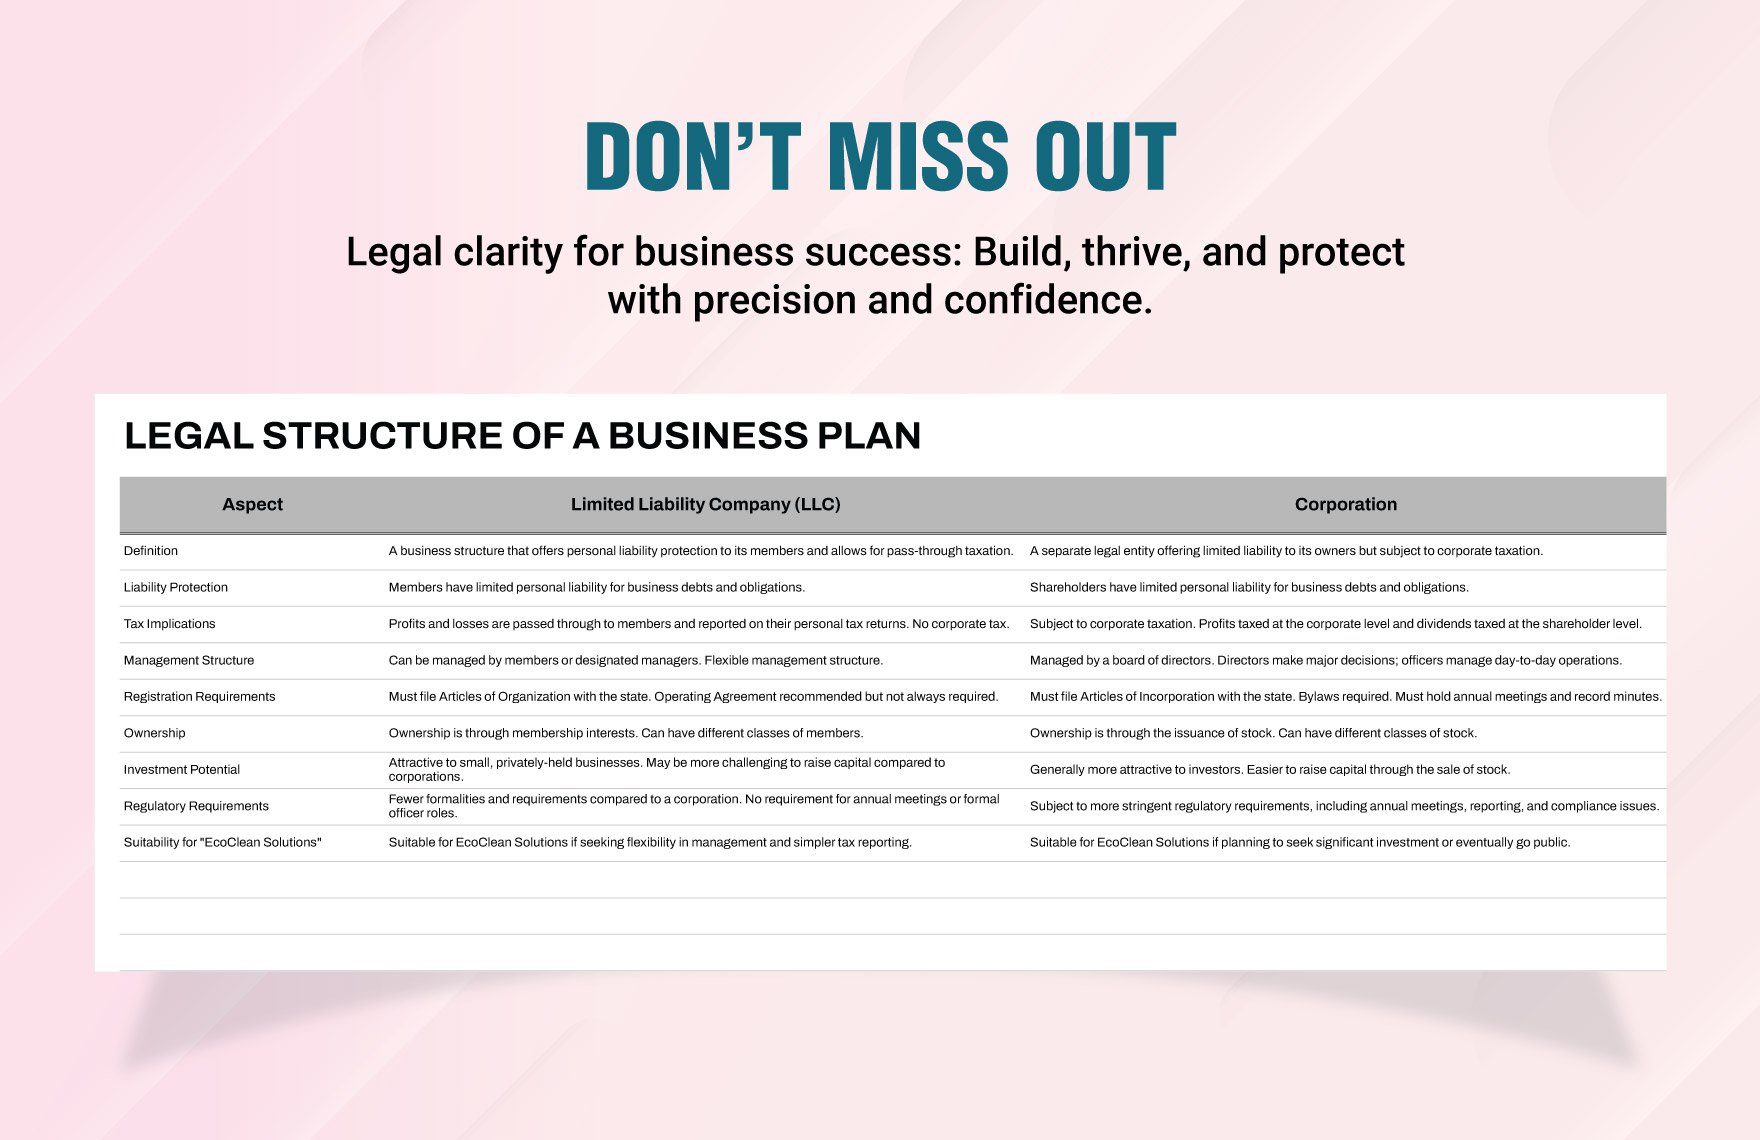 Legal Structure of a Business Plan Template